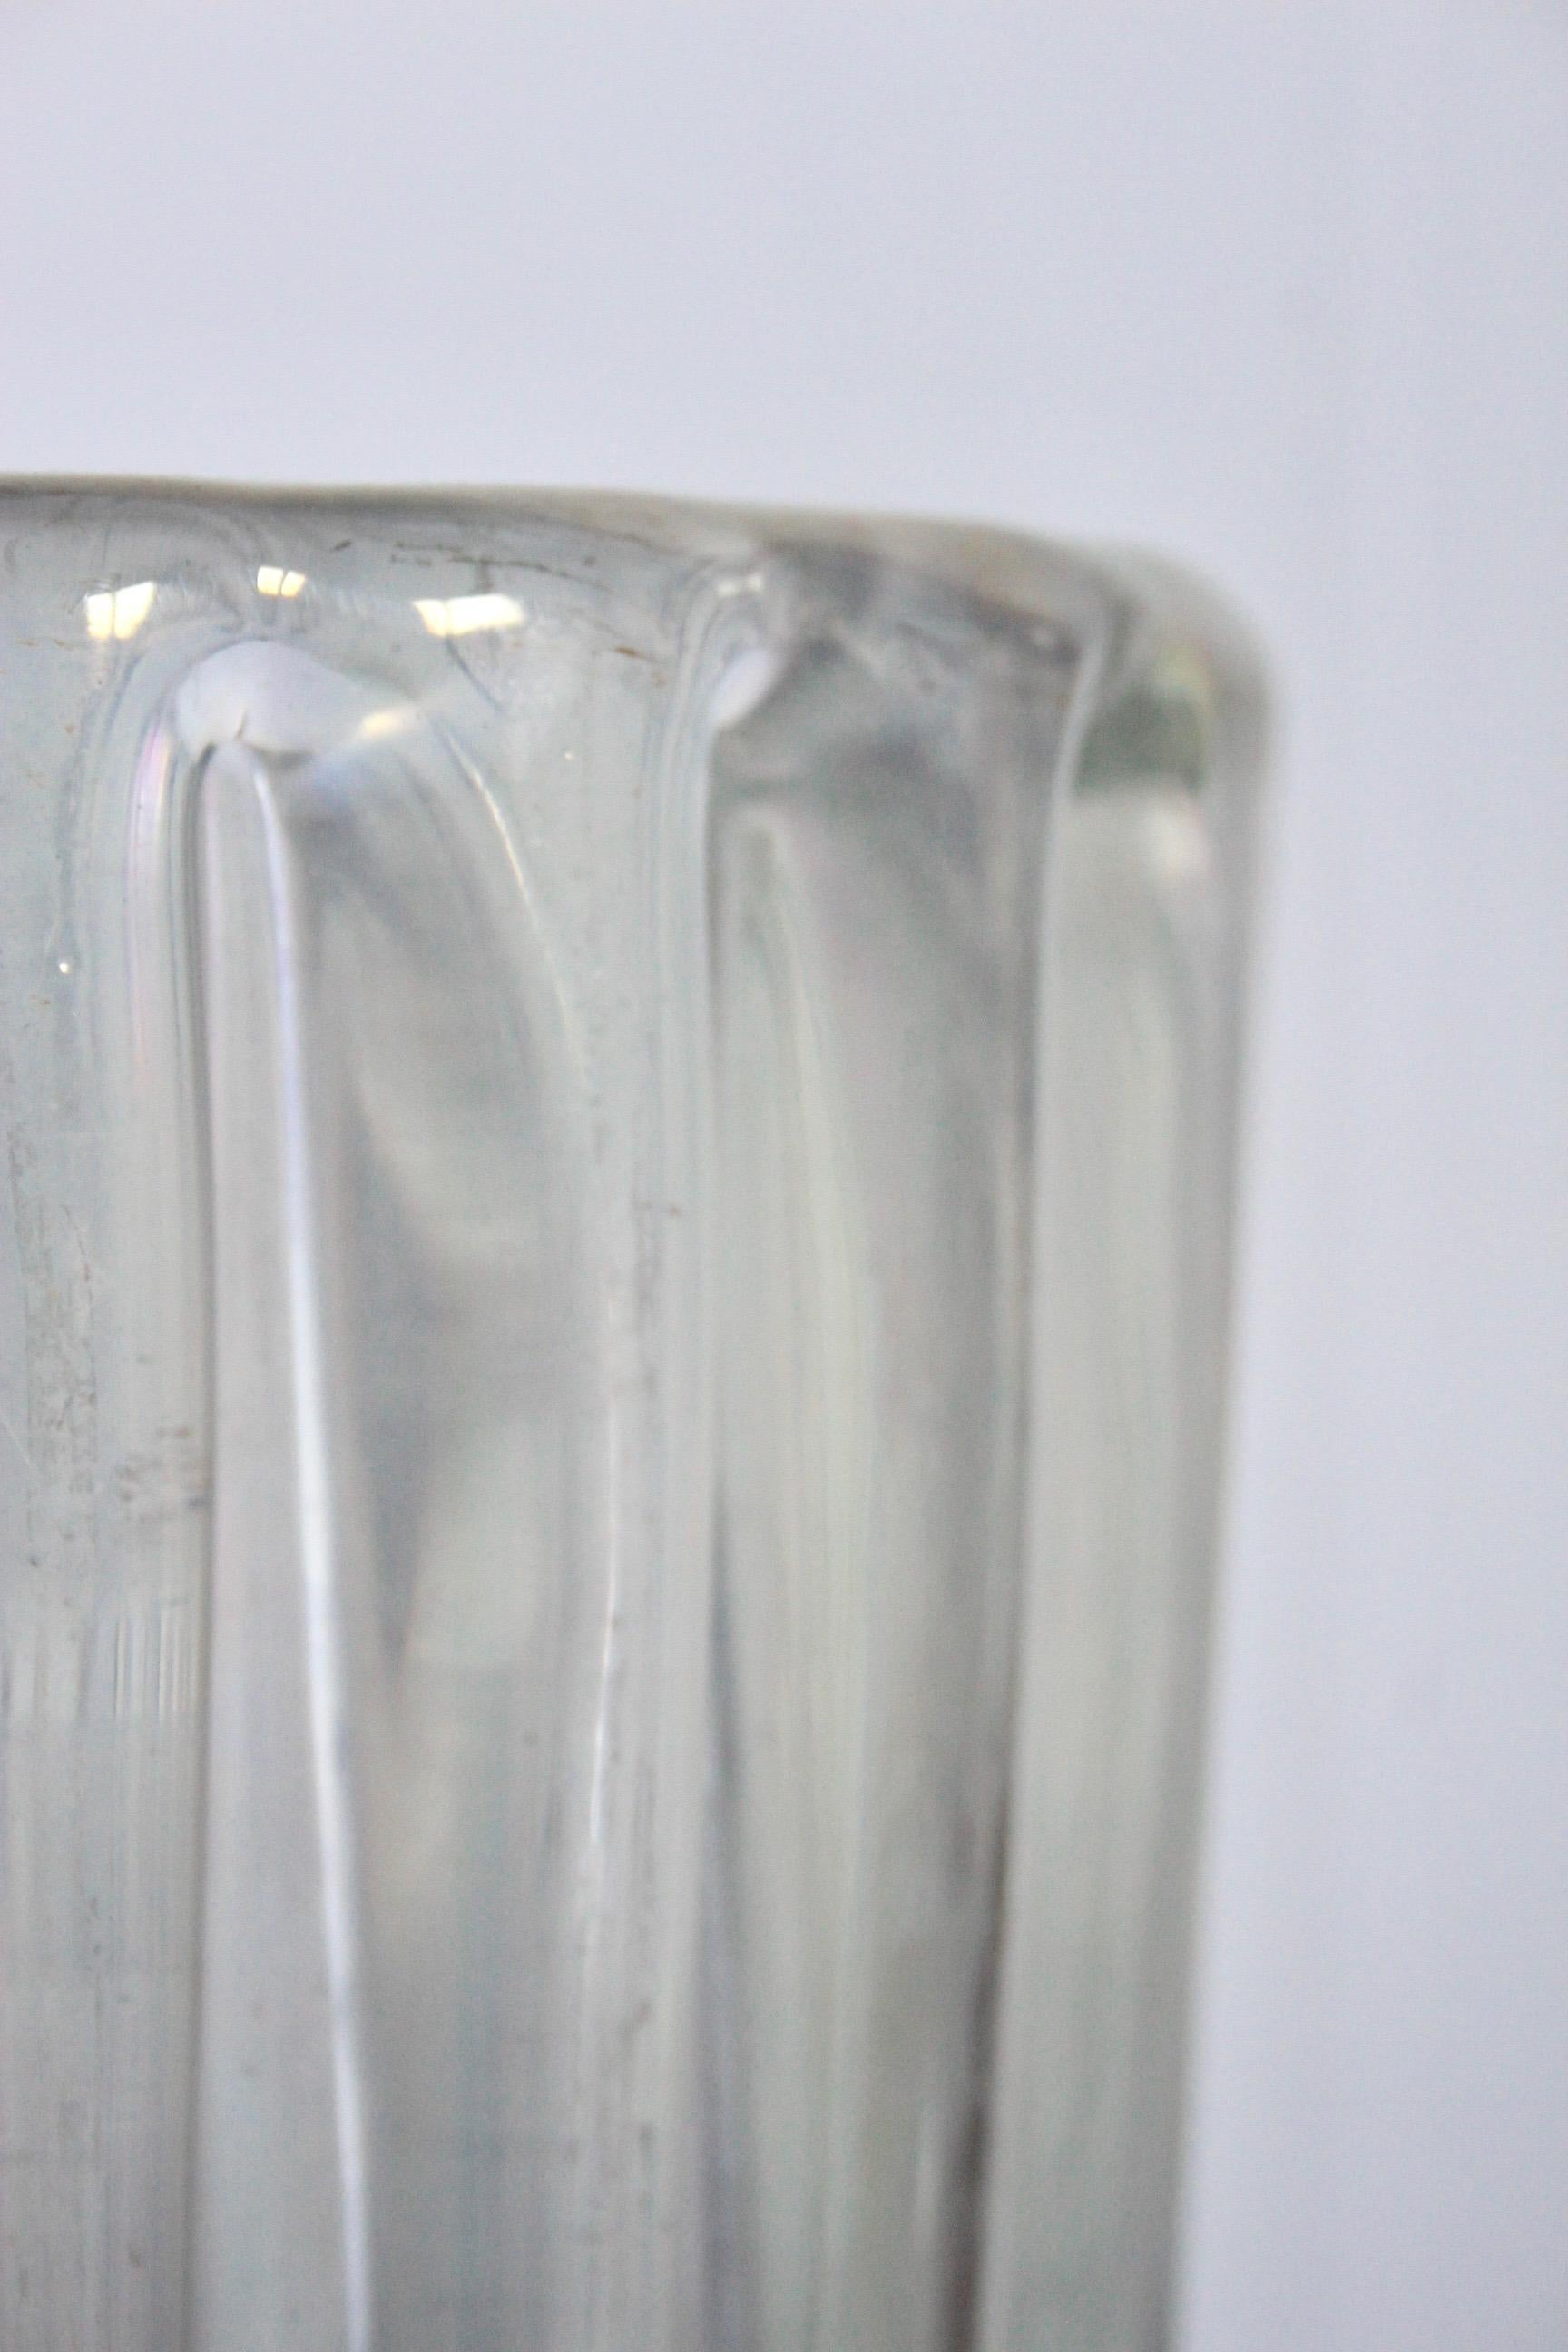 Mid-20th Century Seguso Attributed Glass Vase